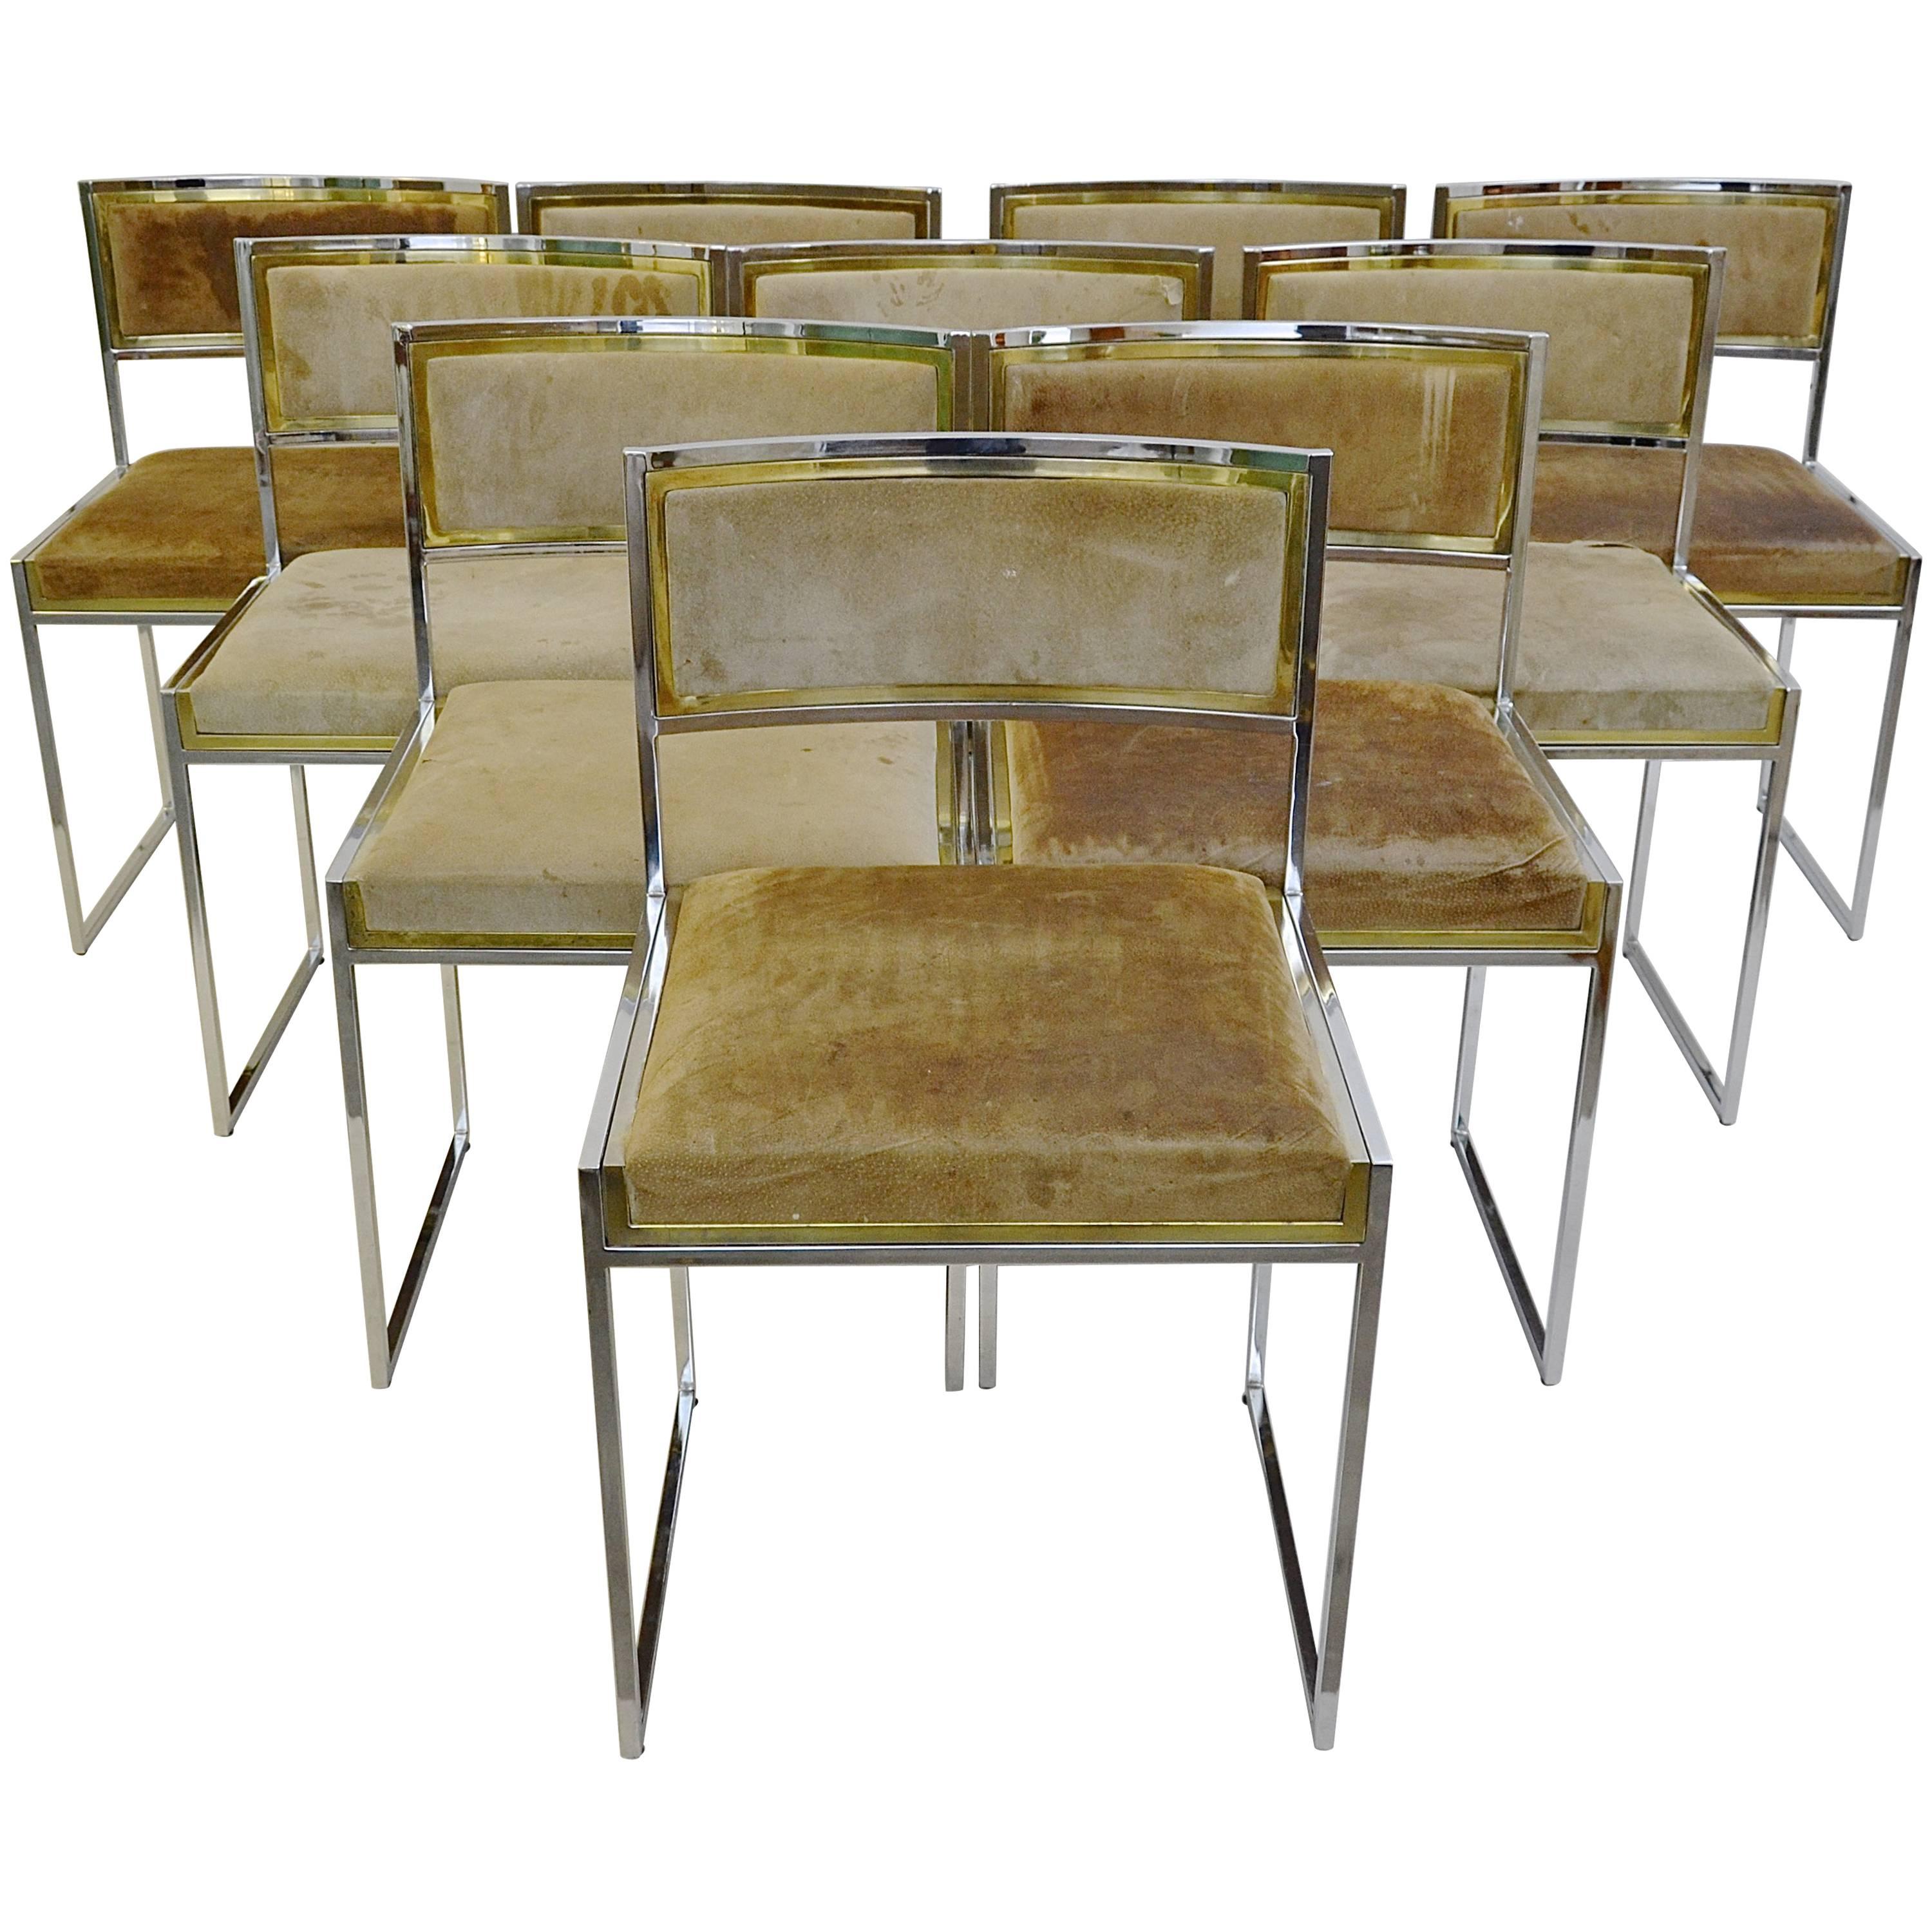 Set of 22 1970s Willy Rizzo Chairs in Brass and Chrome to be Re-Upholstered